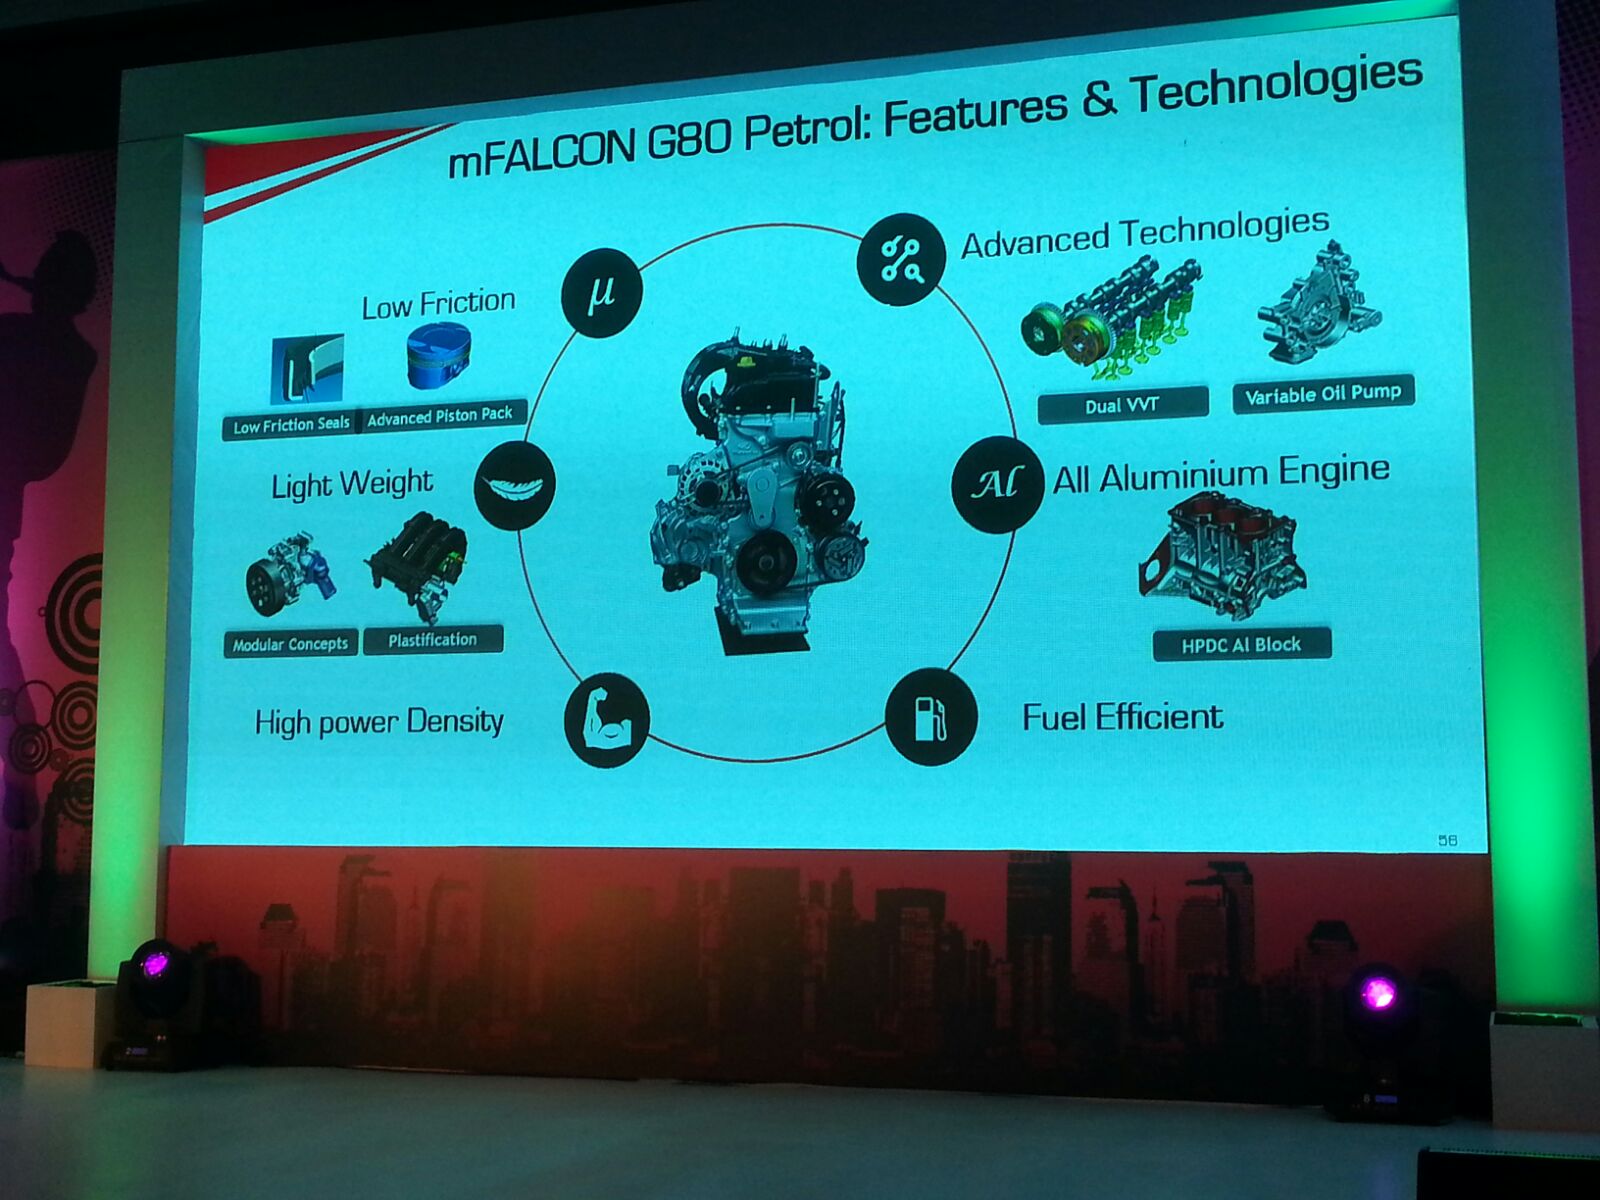 Mahindra-mFalcon-for-KUV100-petrol-features-unveiled.jpg